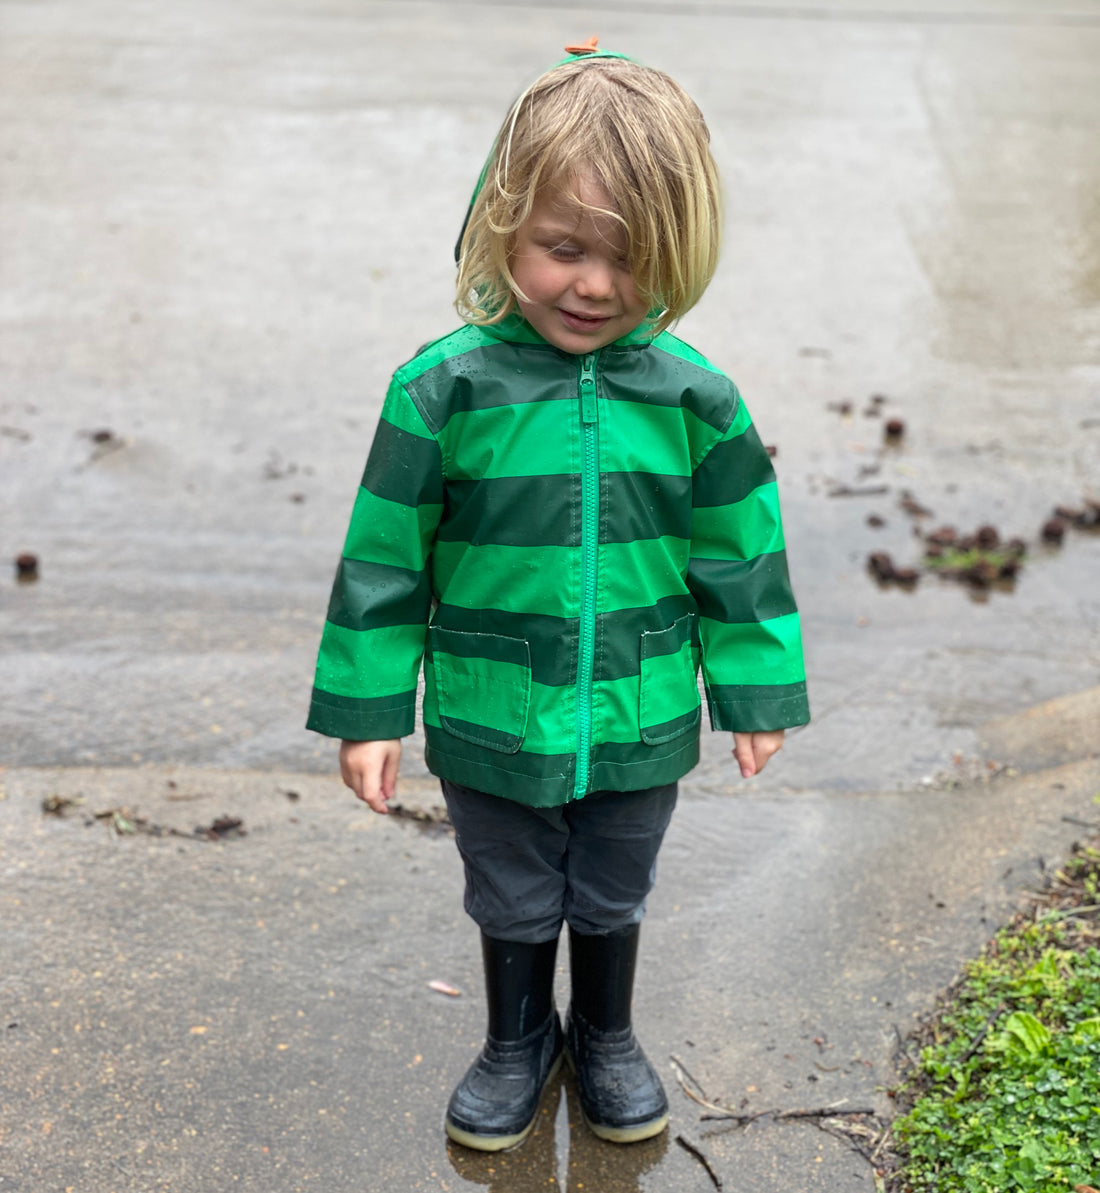 TinyLetter: Rain is a blessing